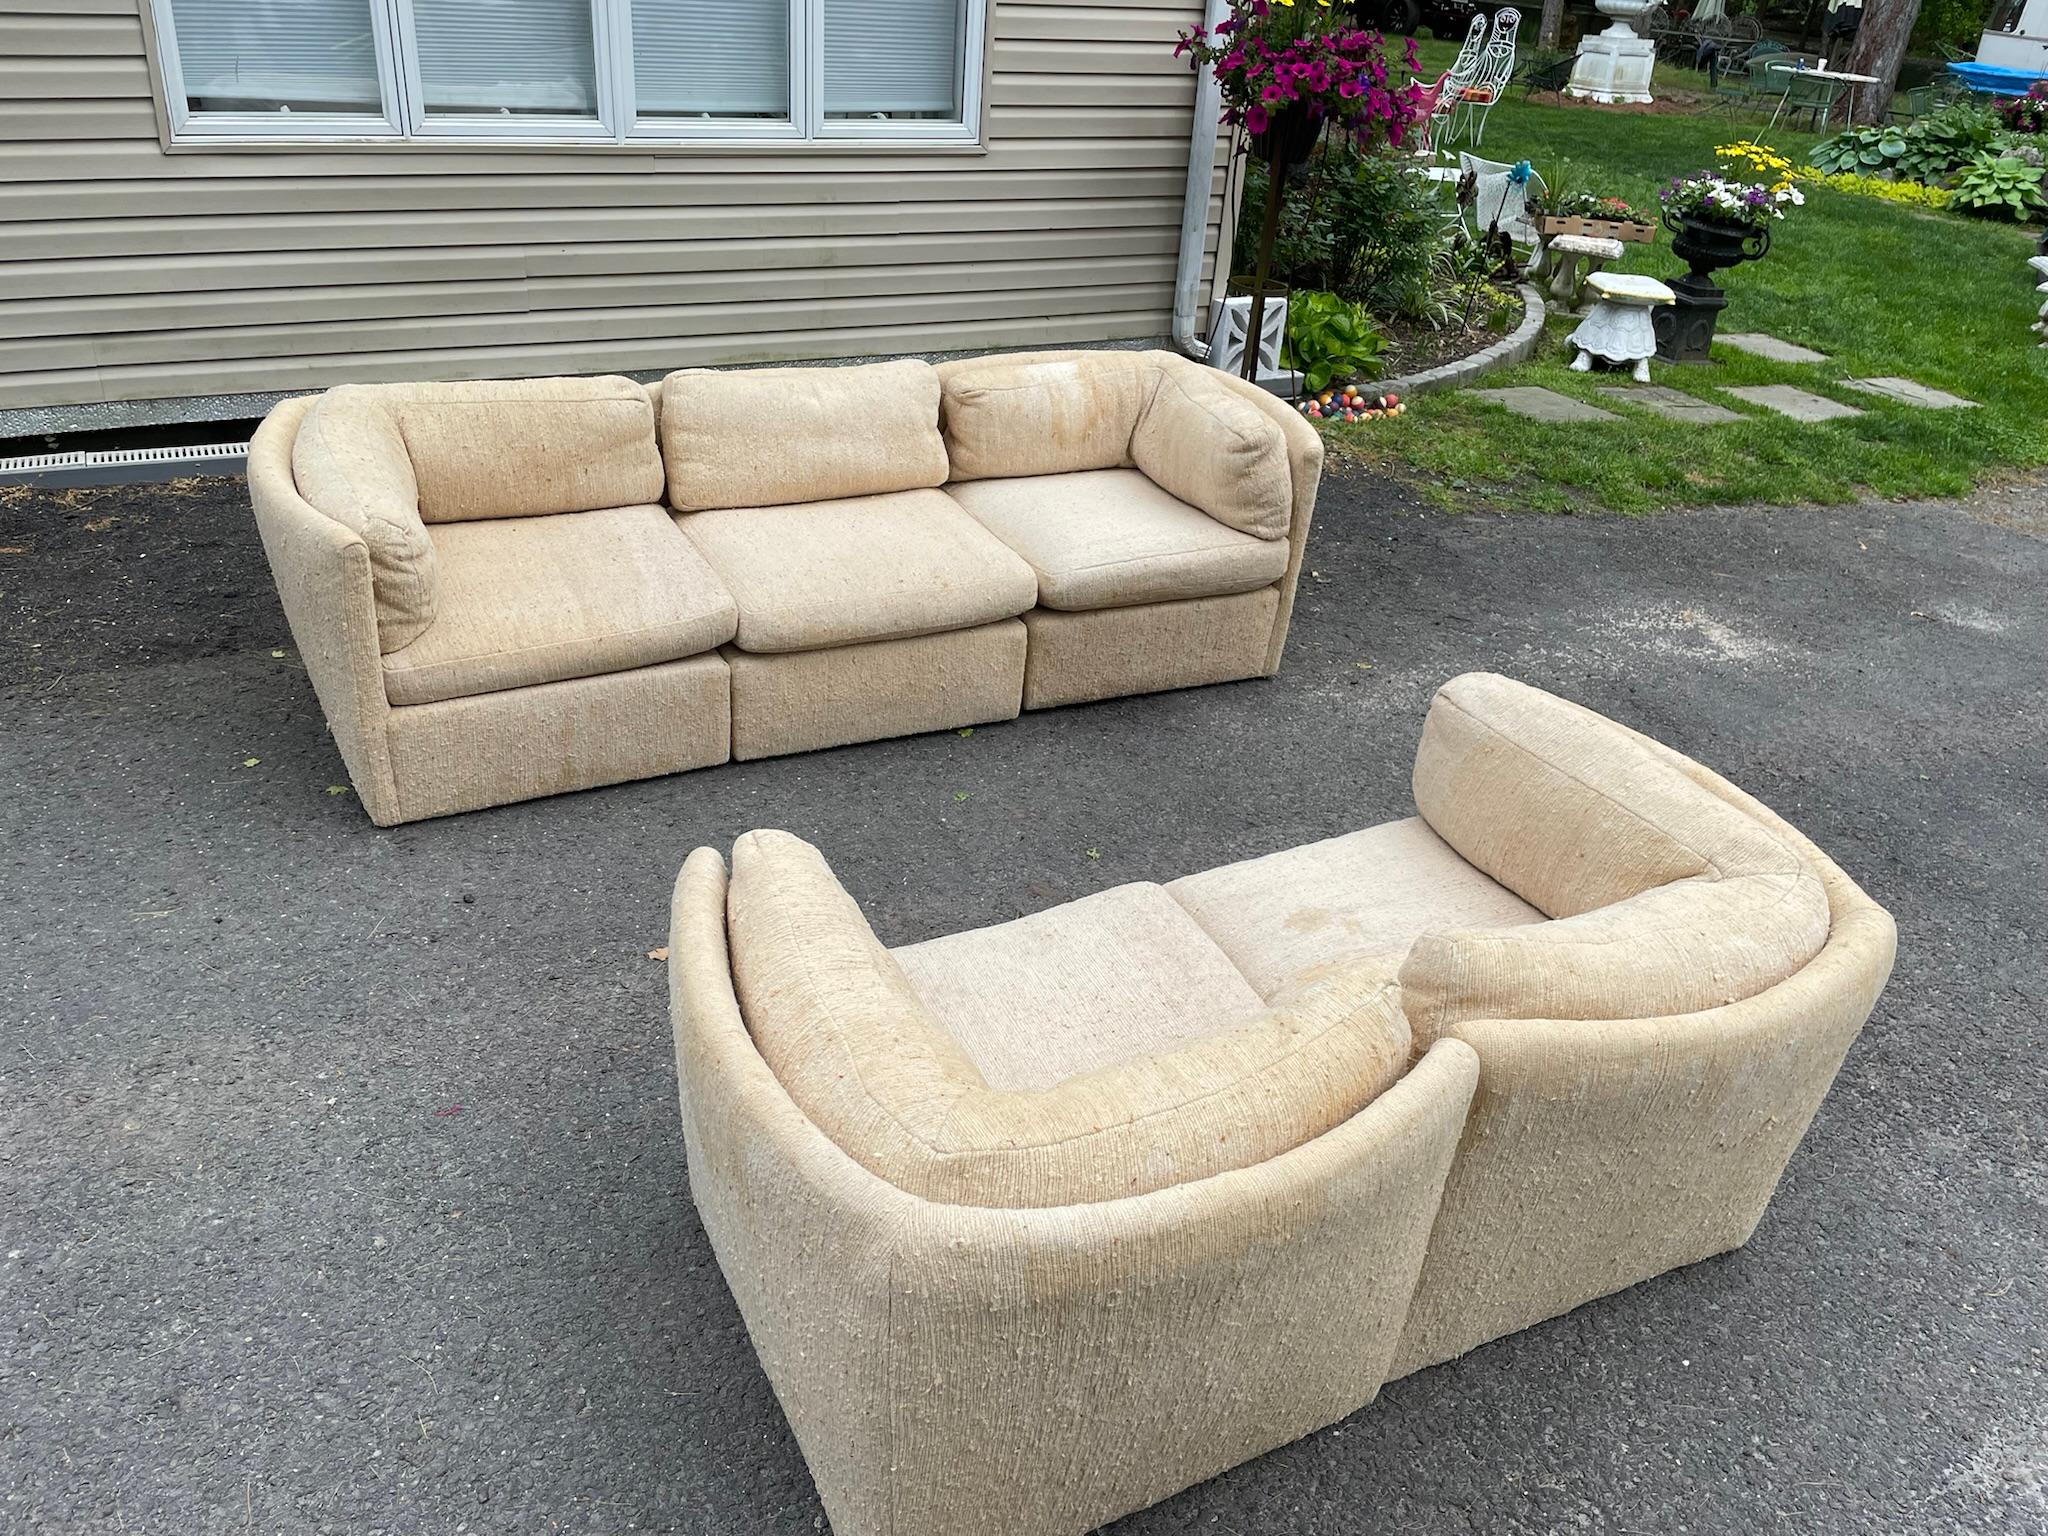 Fabulous Milo Baughman 5 Piece Curved Back Sectional Sofa Mid-Century Modern In Good Condition For Sale In Pemberton, NJ